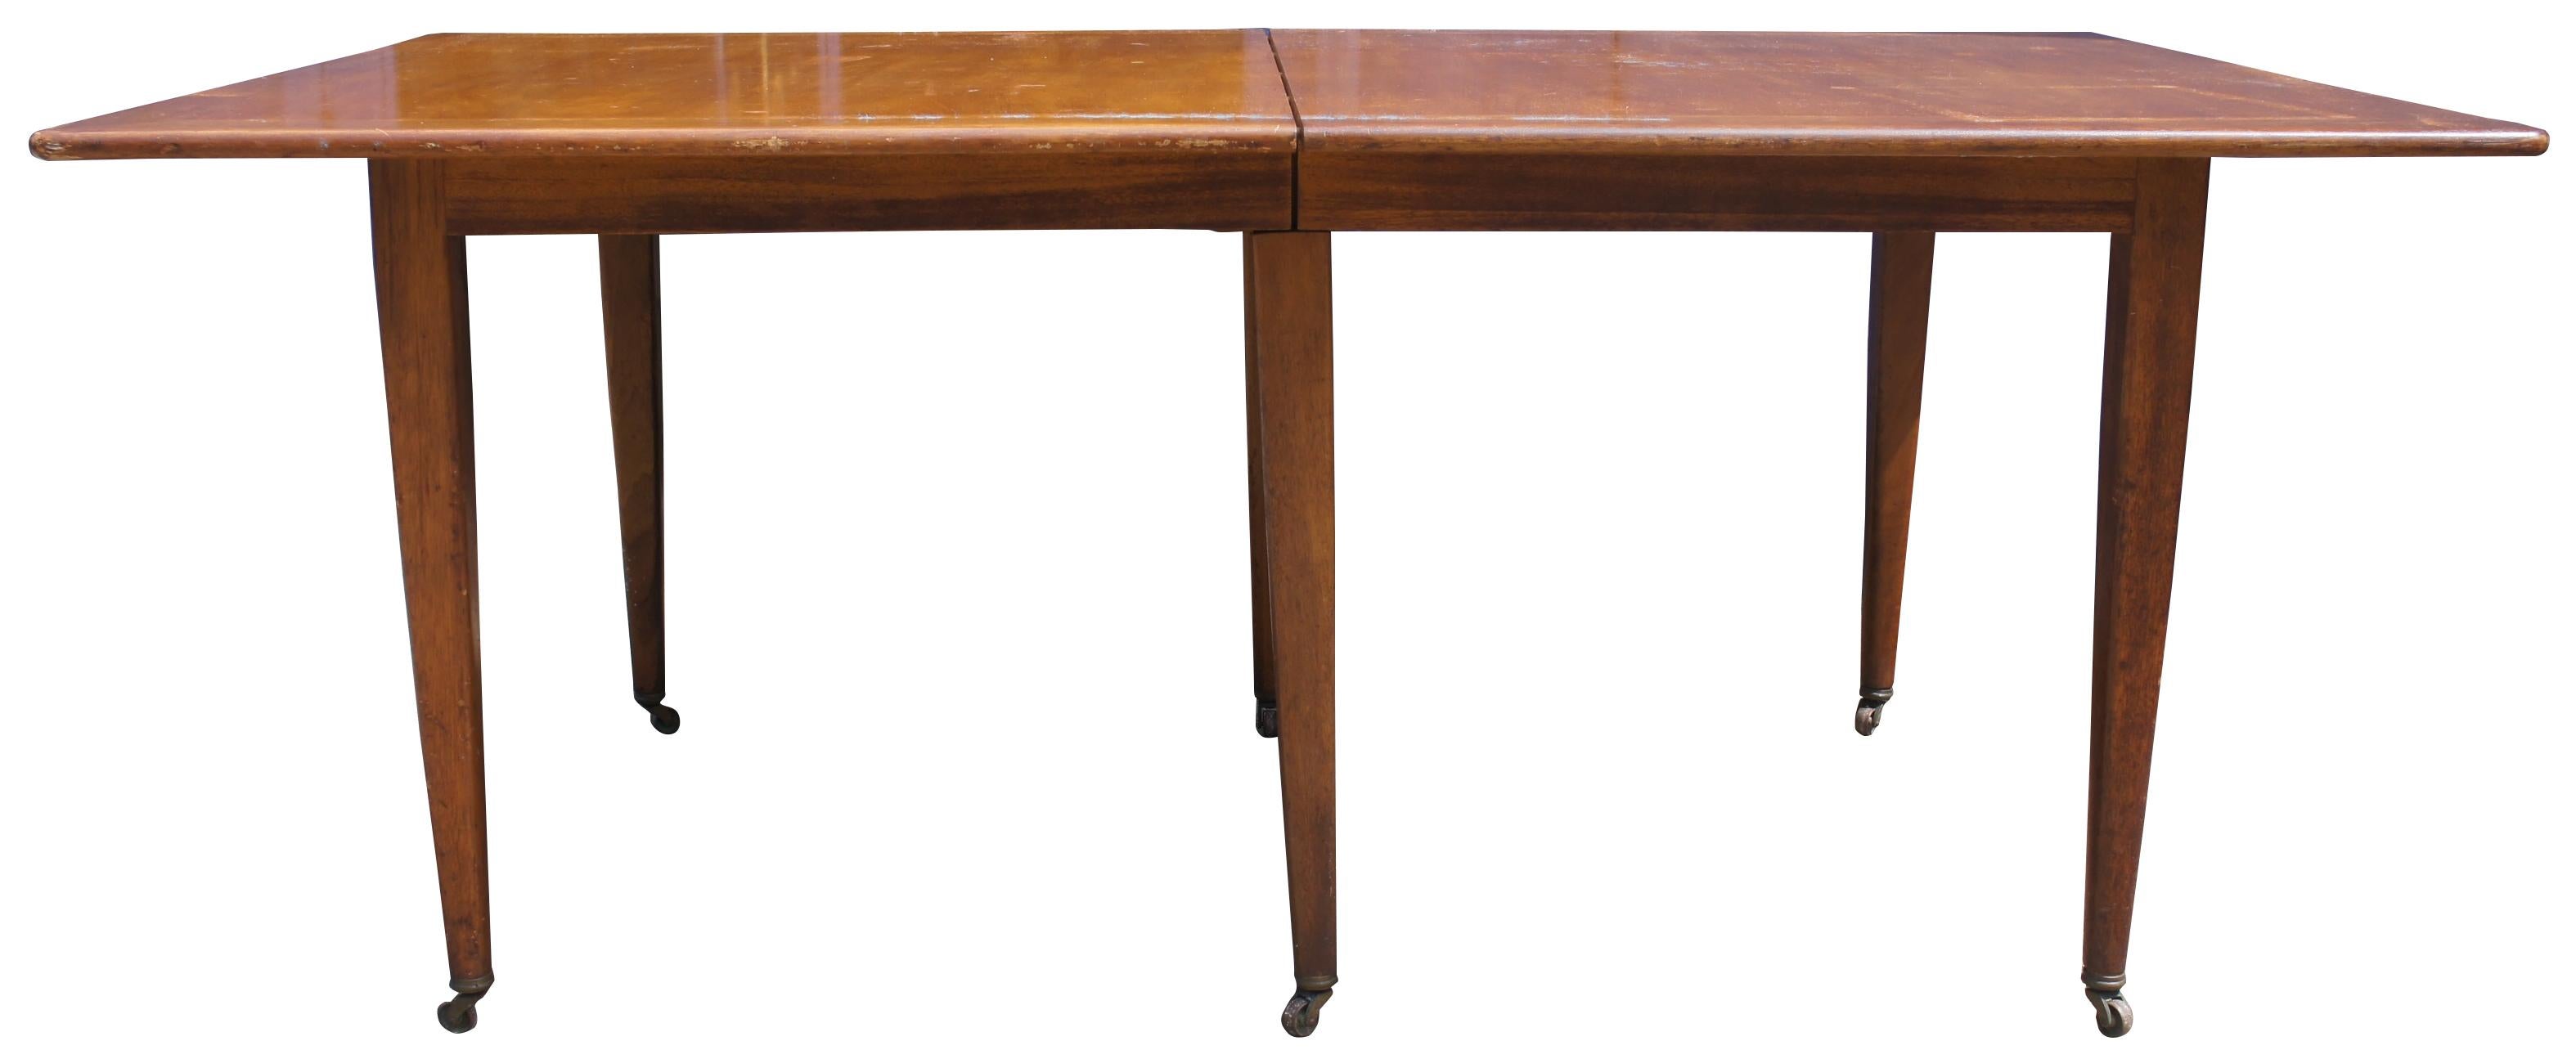 Mid-Century Modern Mahogany Dining Table by Edward Wormley for Dunbar Furniture In Good Condition For Sale In Dayton, OH